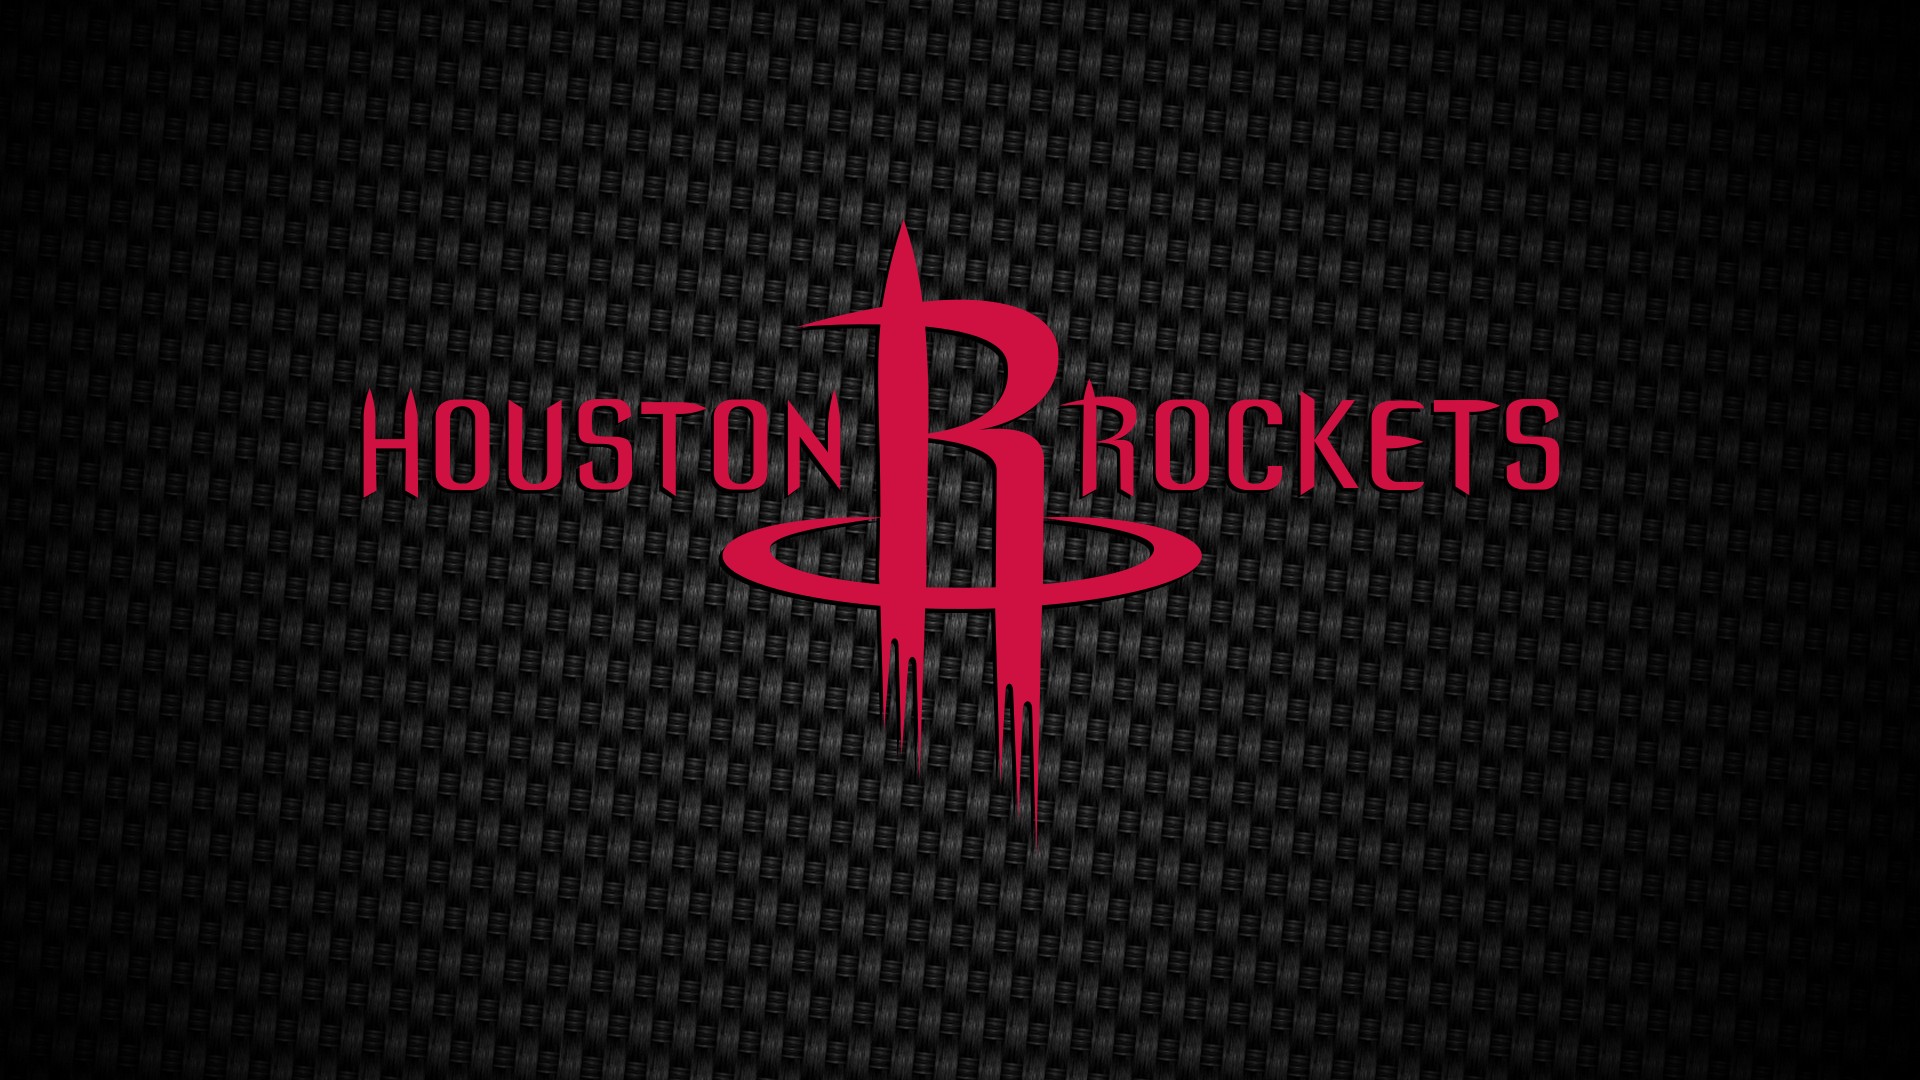 Houston Basketball For Desktop Wallpaper with image dimensions 1920x1080 pixel. You can make this wallpaper for your Desktop Computer Backgrounds, Windows or Mac Screensavers, iPhone Lock screen, Tablet or Android and another Mobile Phone device